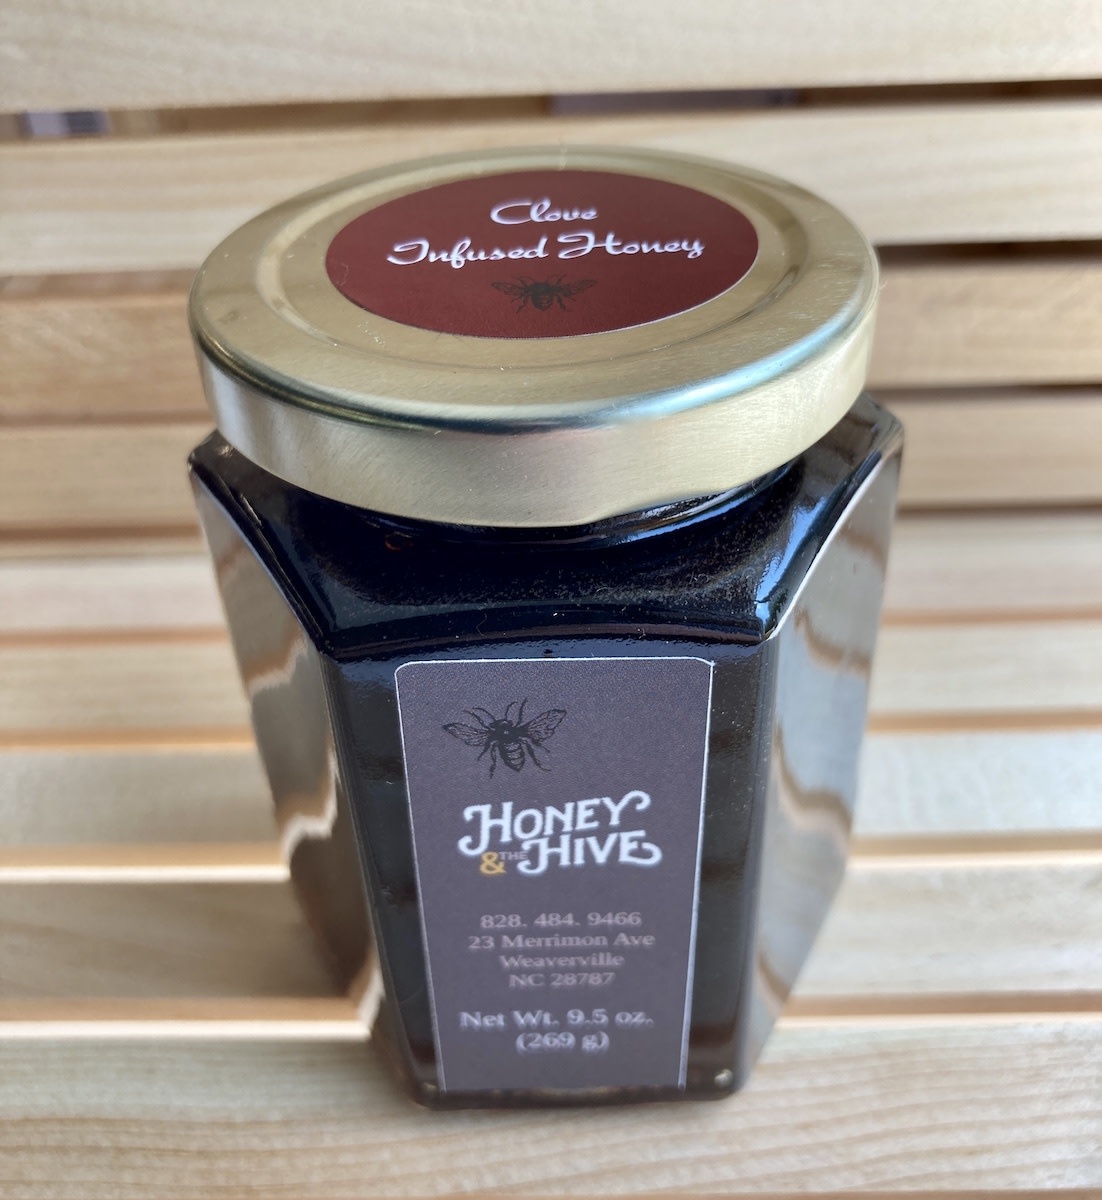 Honey & the Hive H+H Infused Honey, Clove